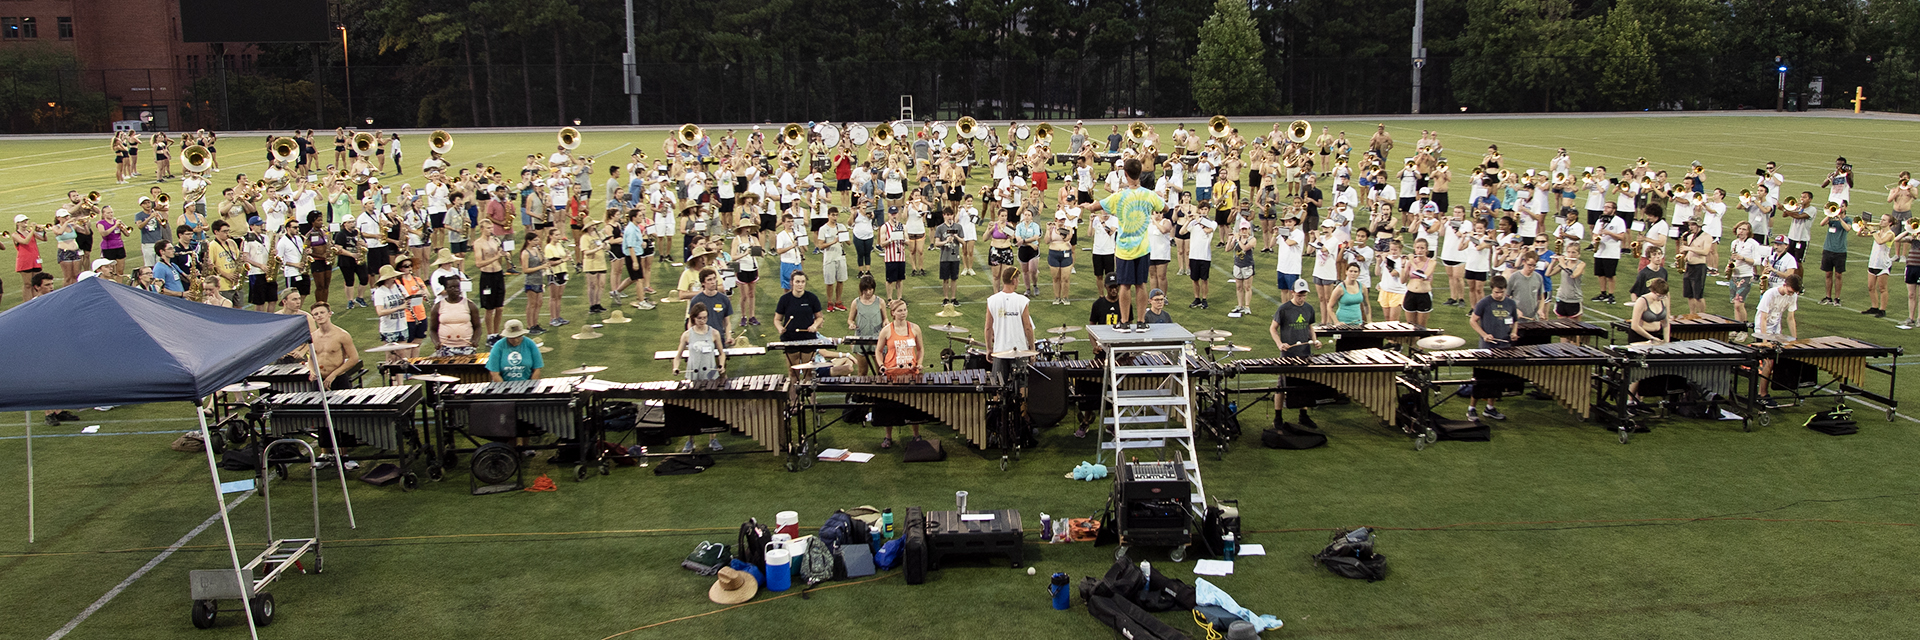 Students outside on a field at band camp.